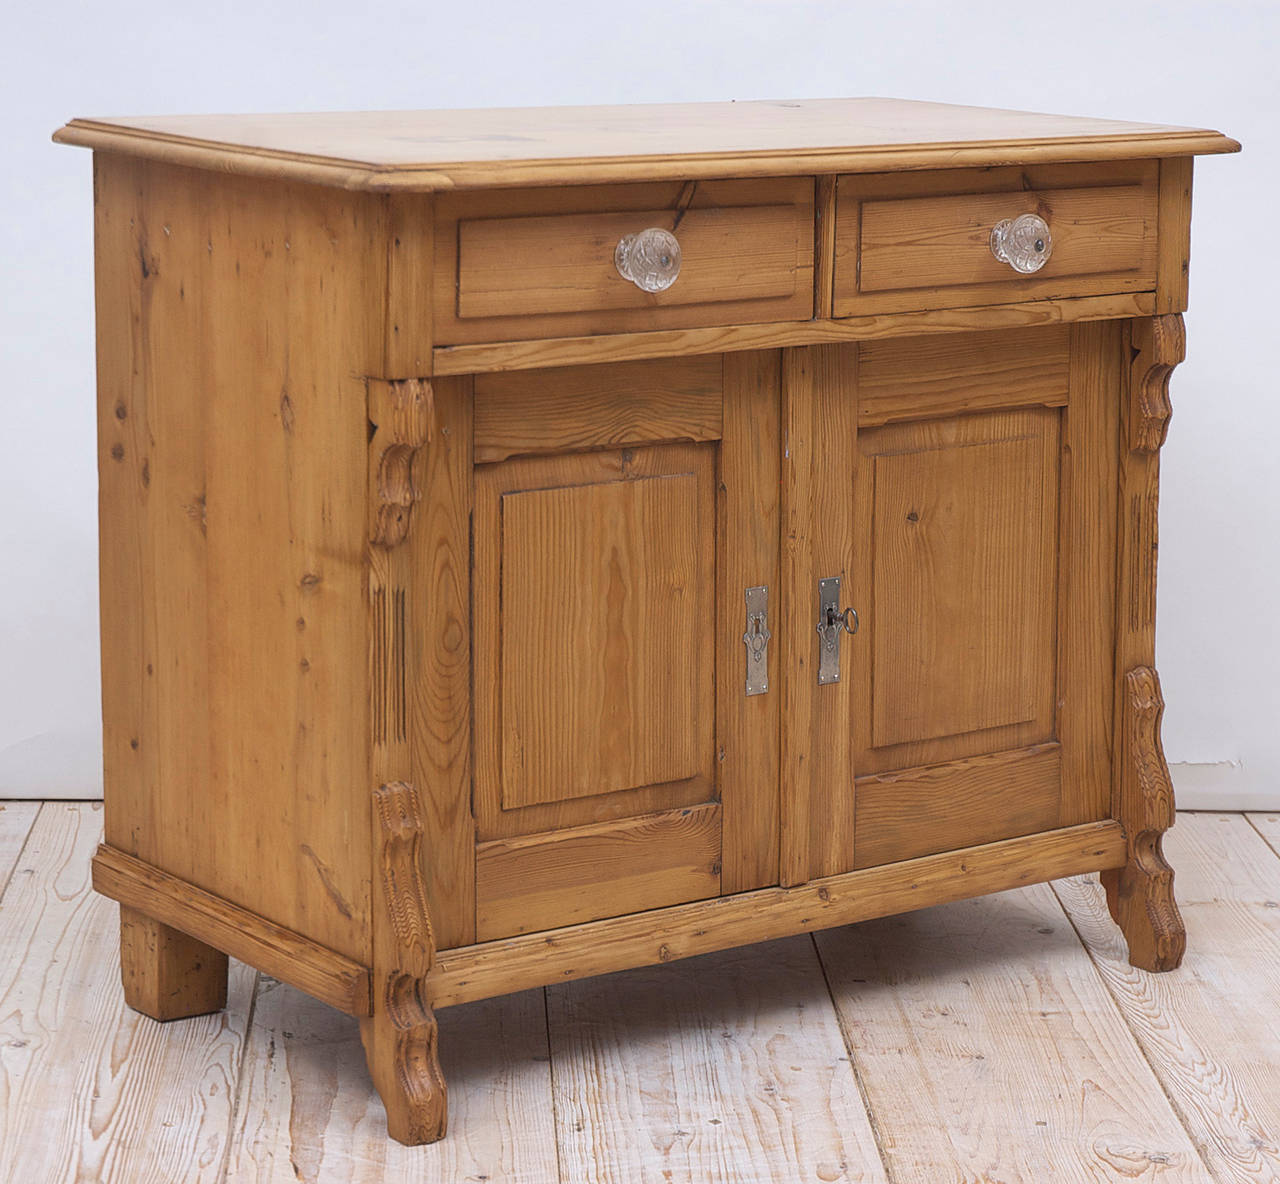 A Louis Philippe cabinet or cupboard in pine with two drawers above two cabinet doors, with nickel key plates and glass knobs, German, circa 1860. A charming informal night stand or bathroom vanity for use with a sink!

Dimensions: 39 1/4"